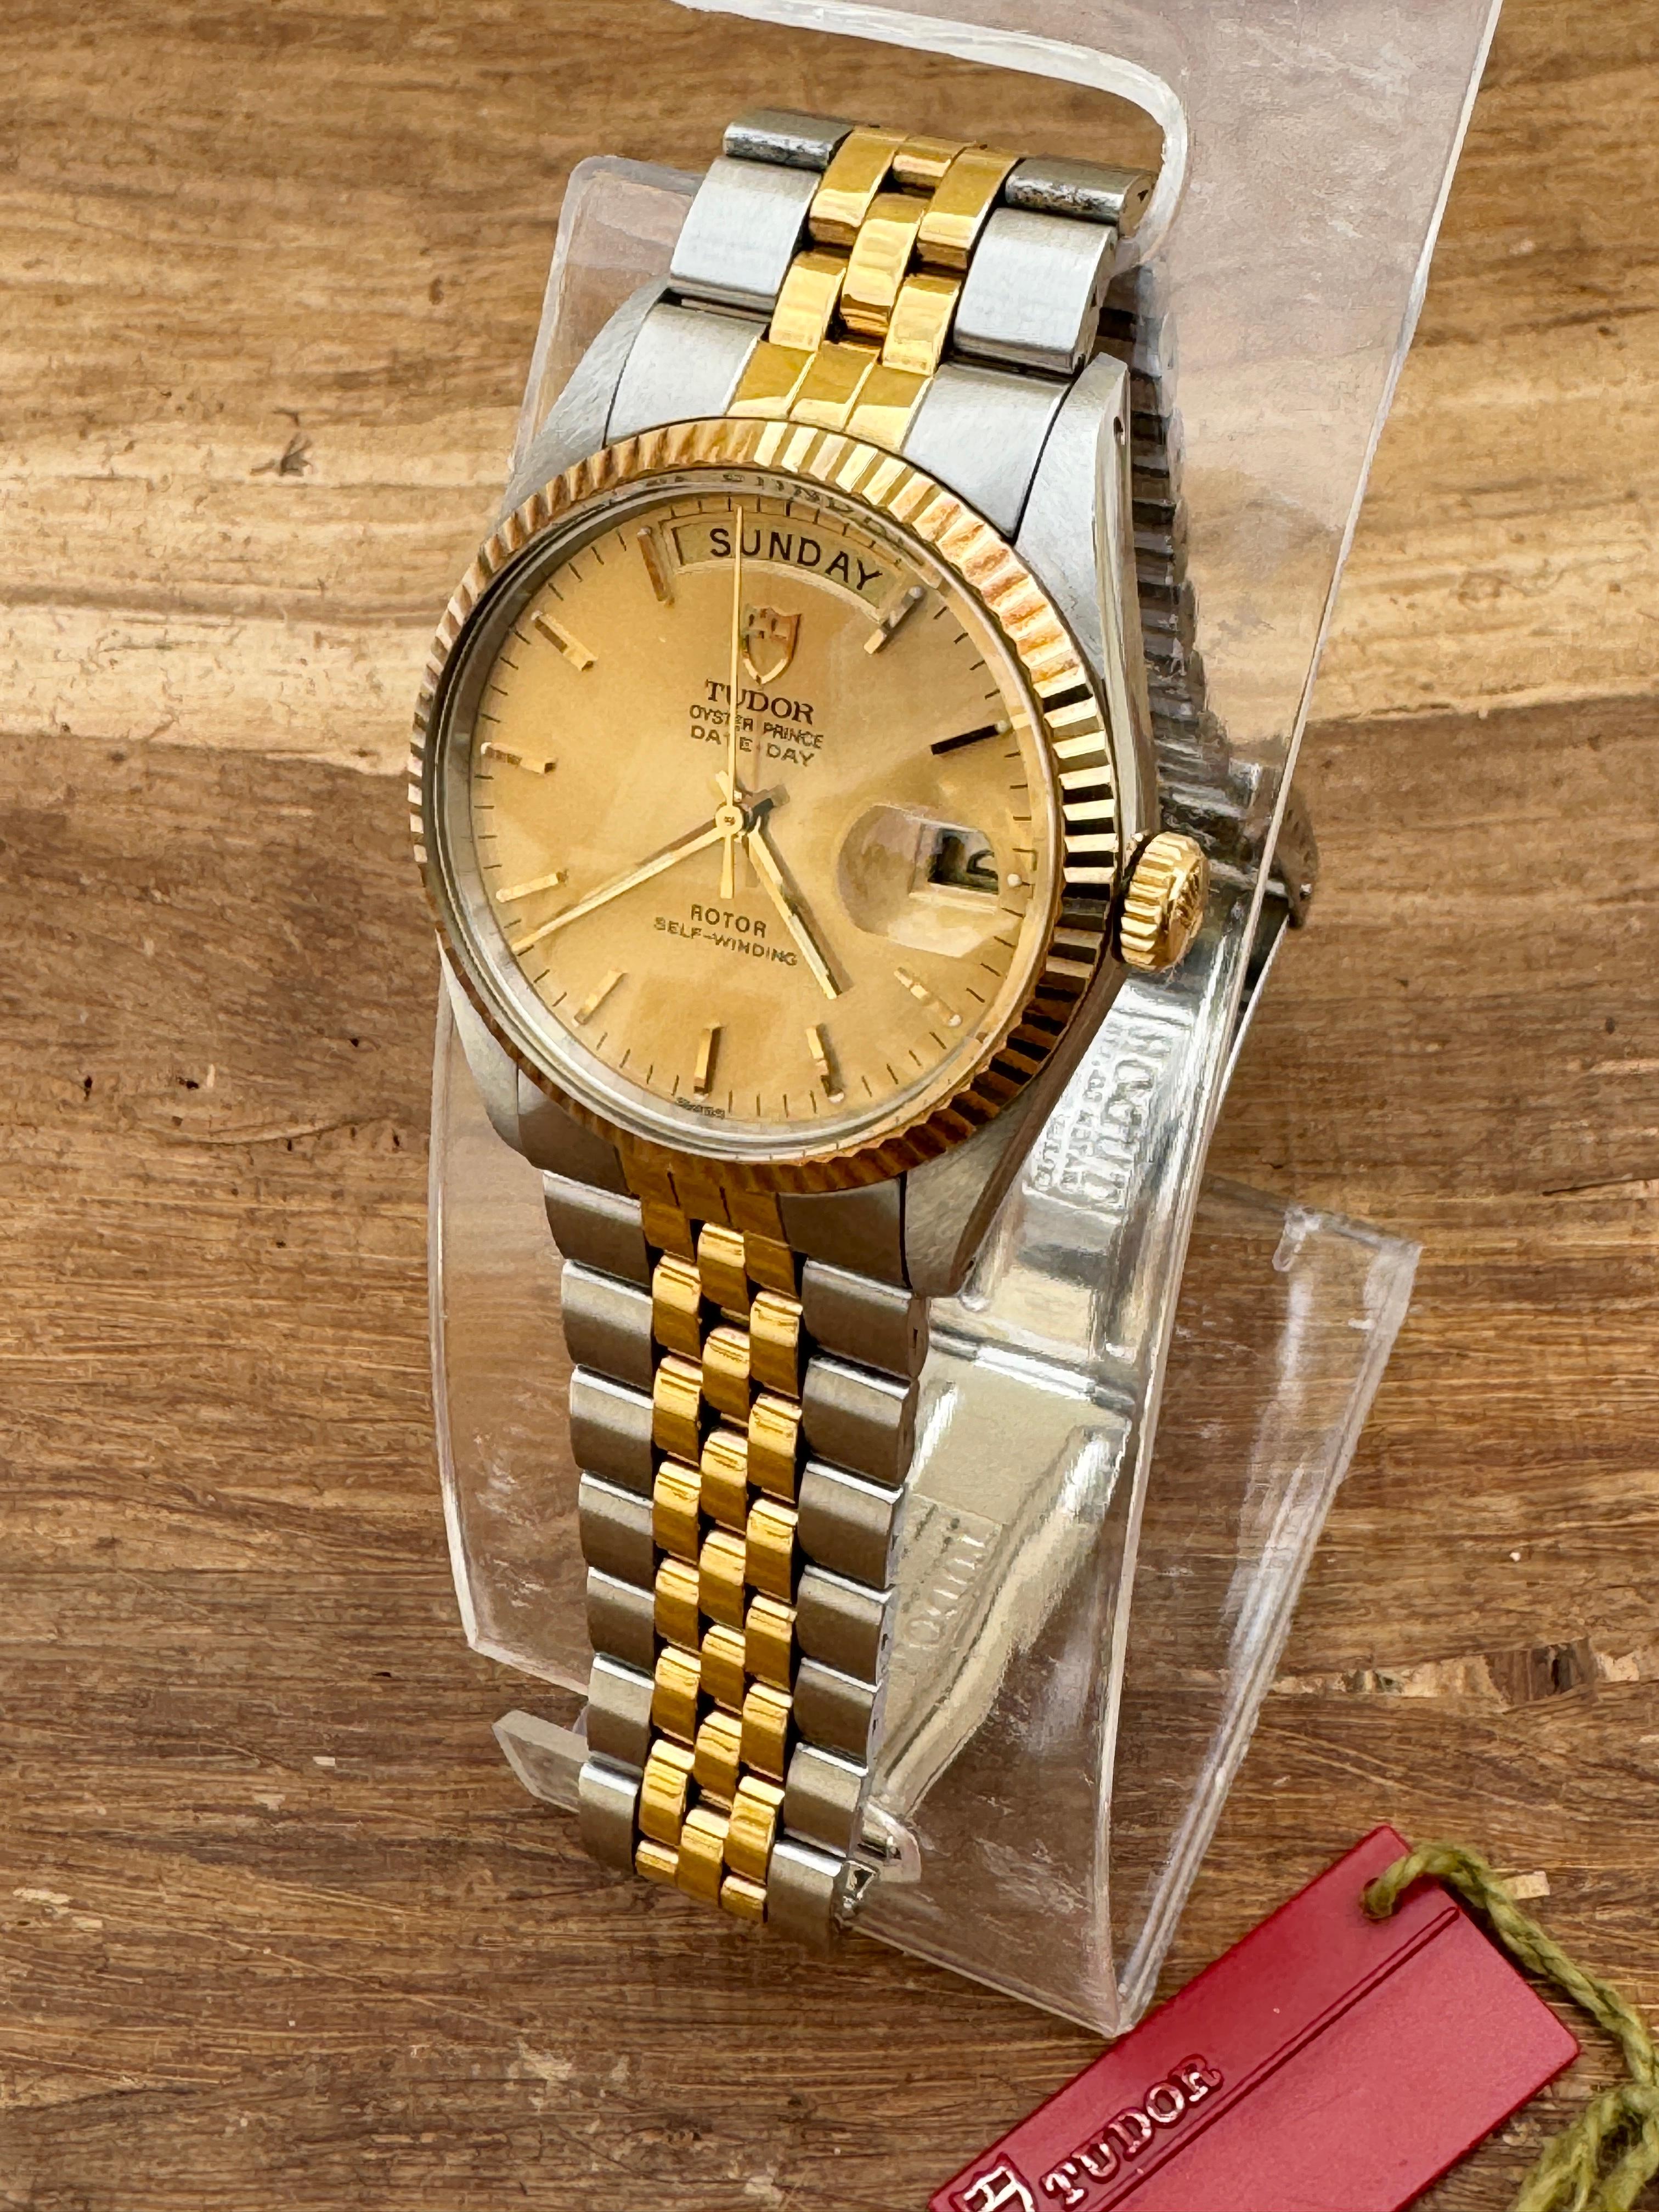 Brand: Tudor  

Model: Prince Date Day

Reference Number:  94613 

Country Of Manufacture: Switzerland

Movement: Automatic

Case Material: Gold/Steel

Measurements : 36 mm. (without crown)

Band Type : Gold/Steel

Band Condition : In Excellent